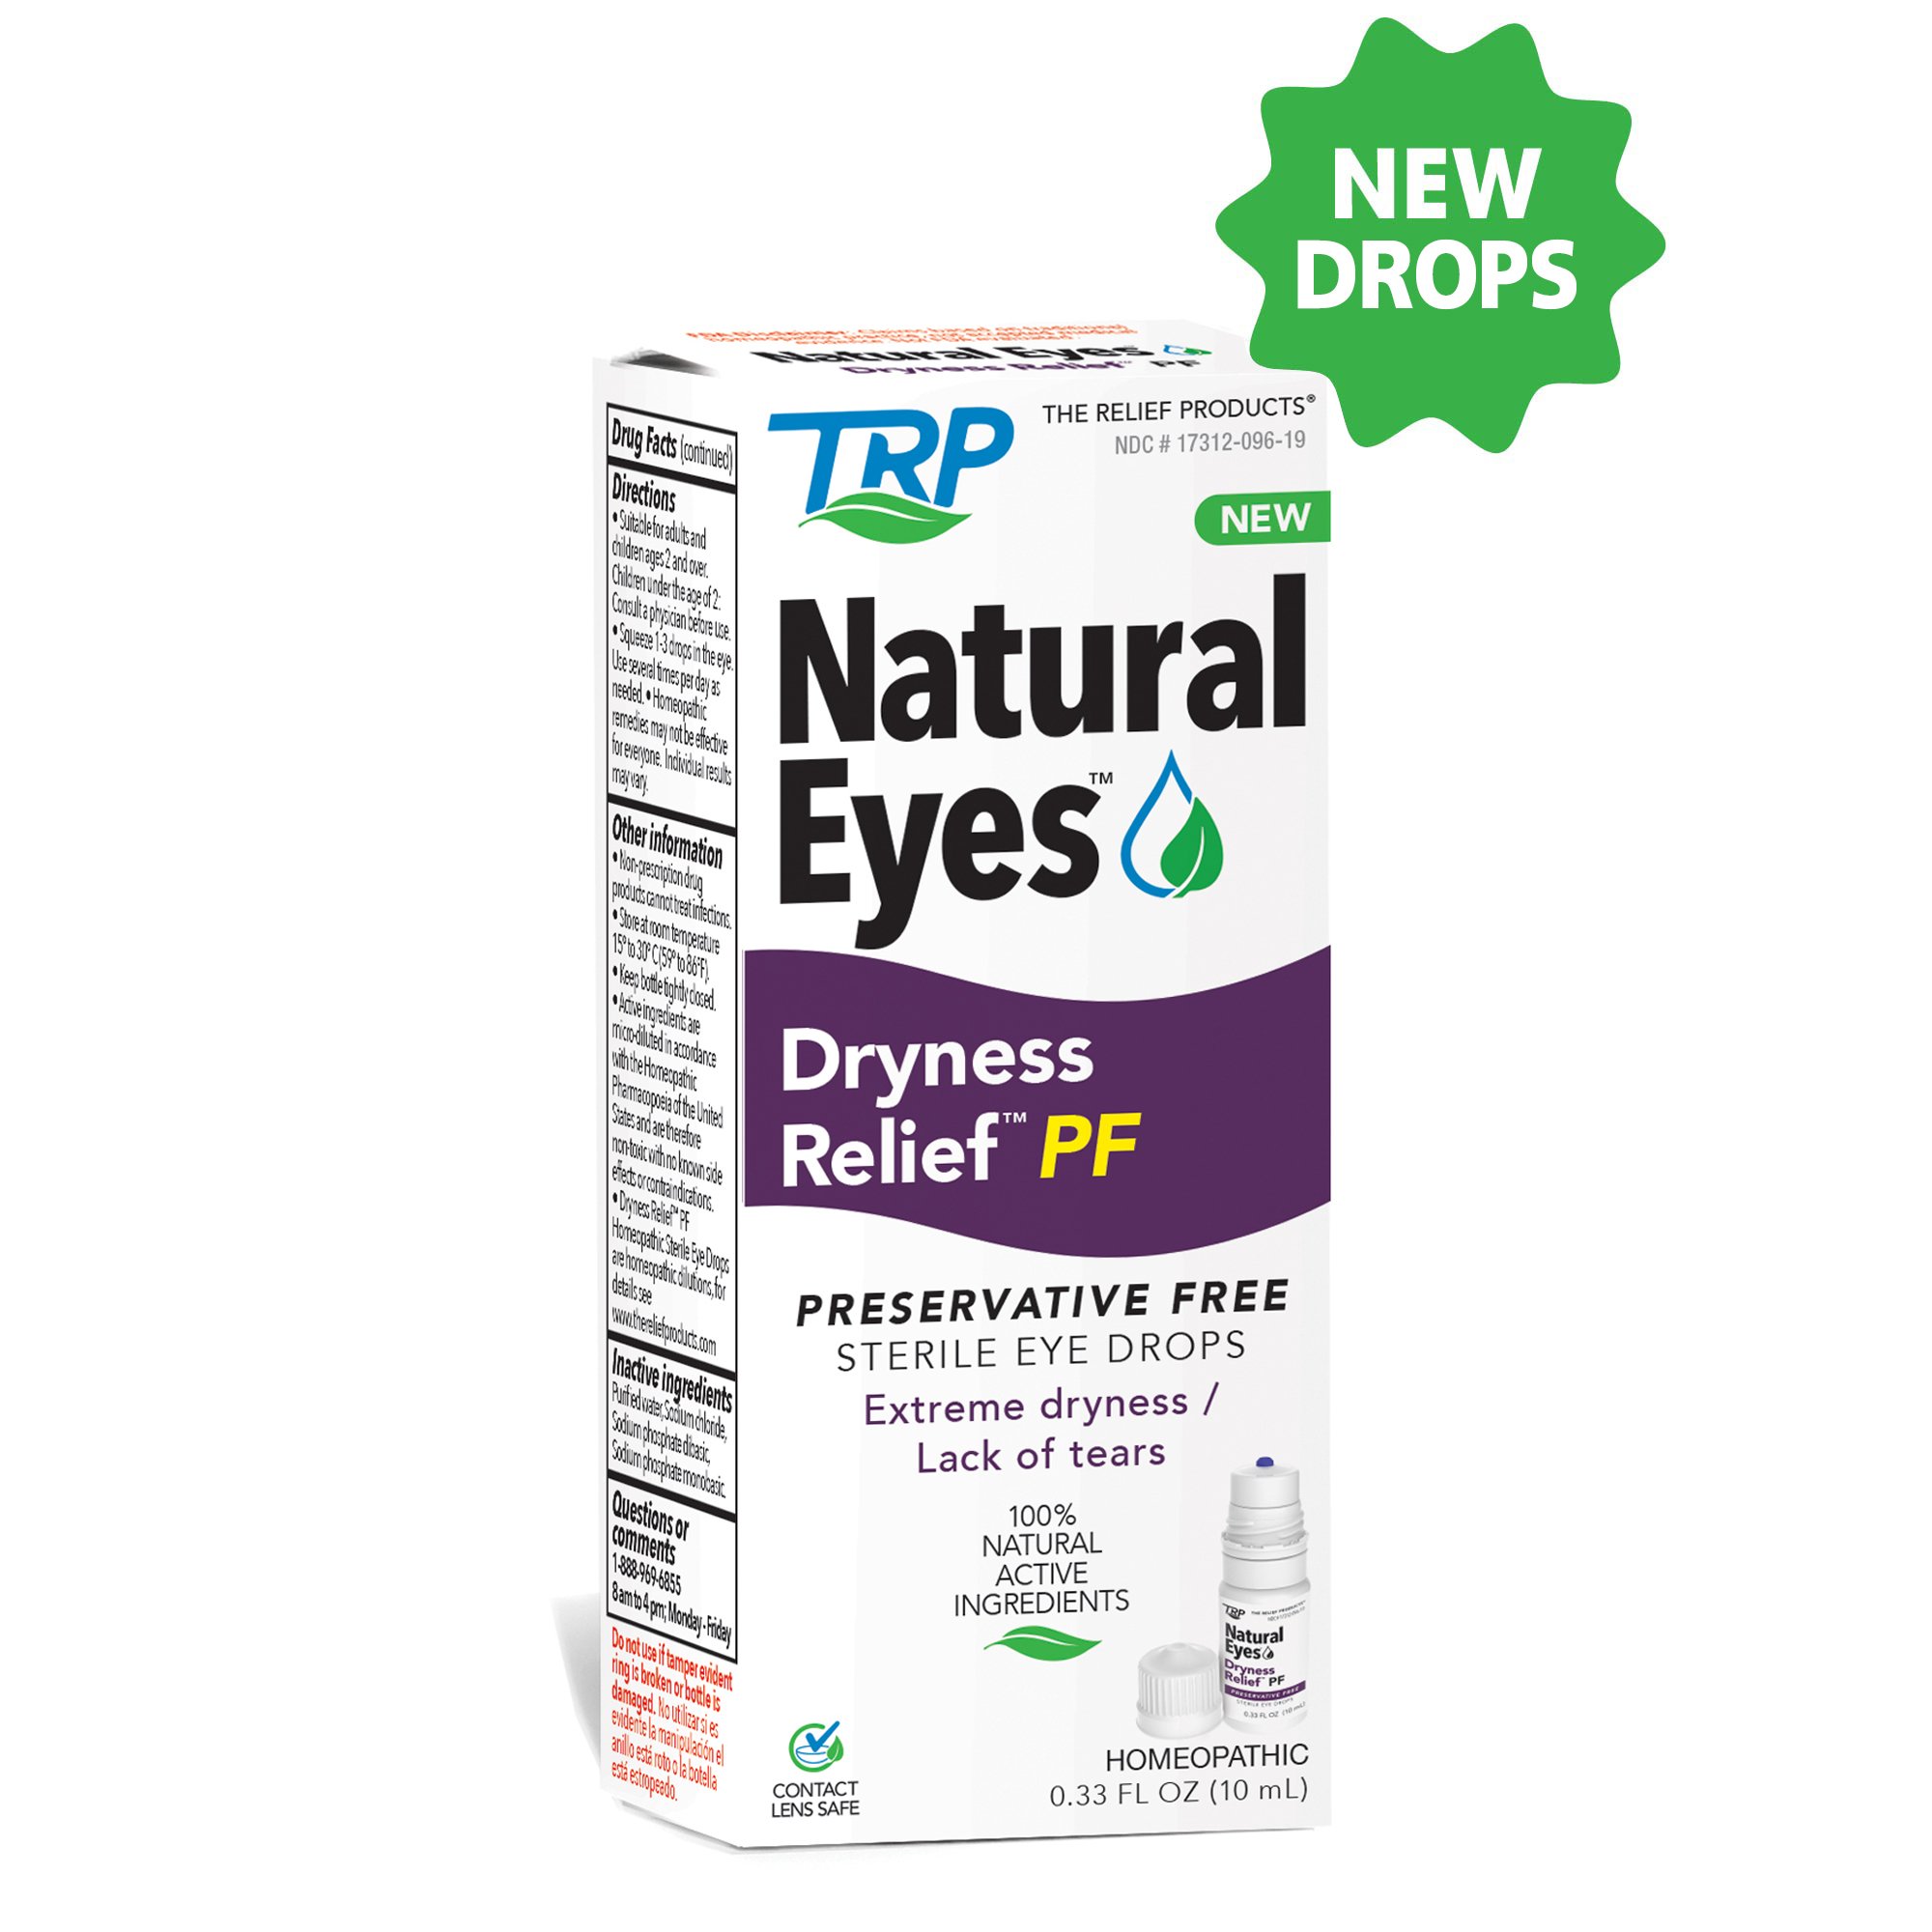 Natural Eyes Dryness Relief PF Eye Drops